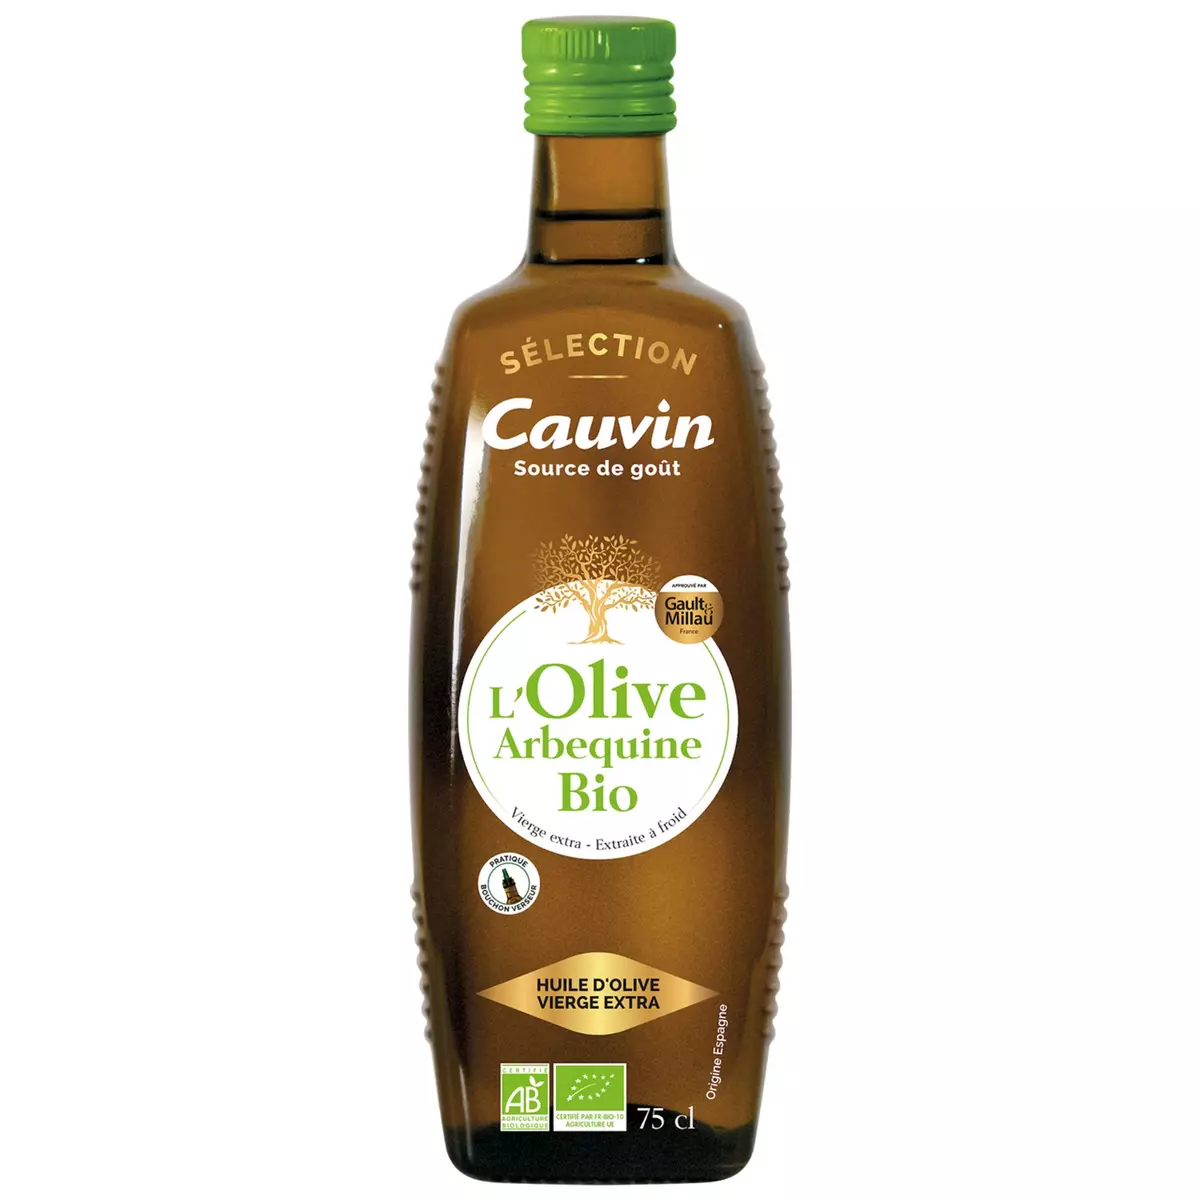 CAUVIN Arbequine huile d'olive vierge extra bio 75cl